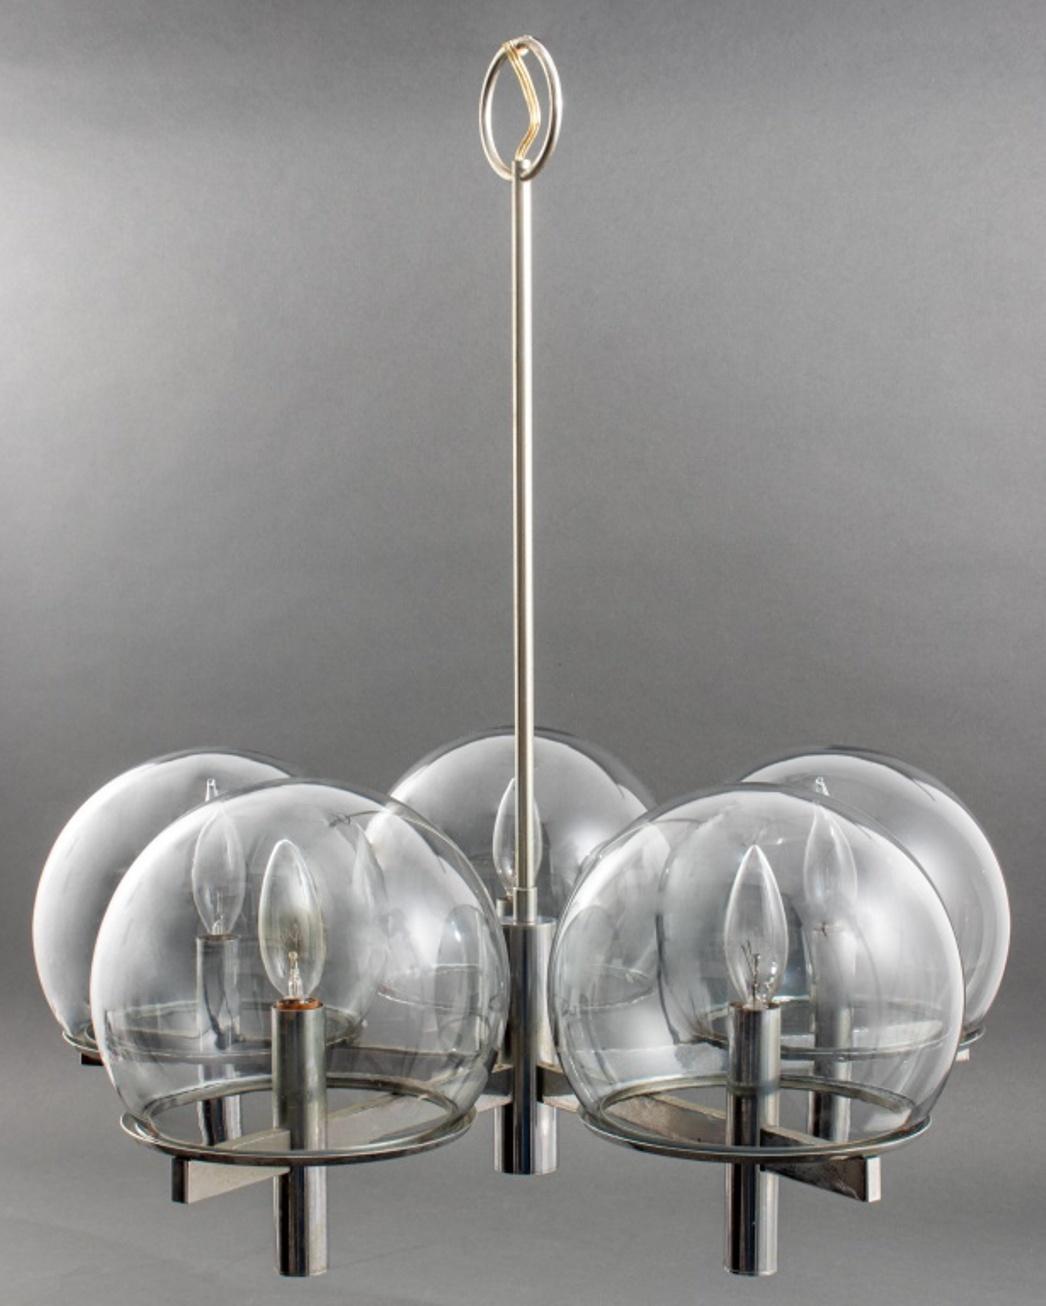 Gaetano Sciolari (Italian, 1927 - 1994) Mid-Century Modern chandelier with chromed metal structure and five smoked glass globes.

Dimensions: 24